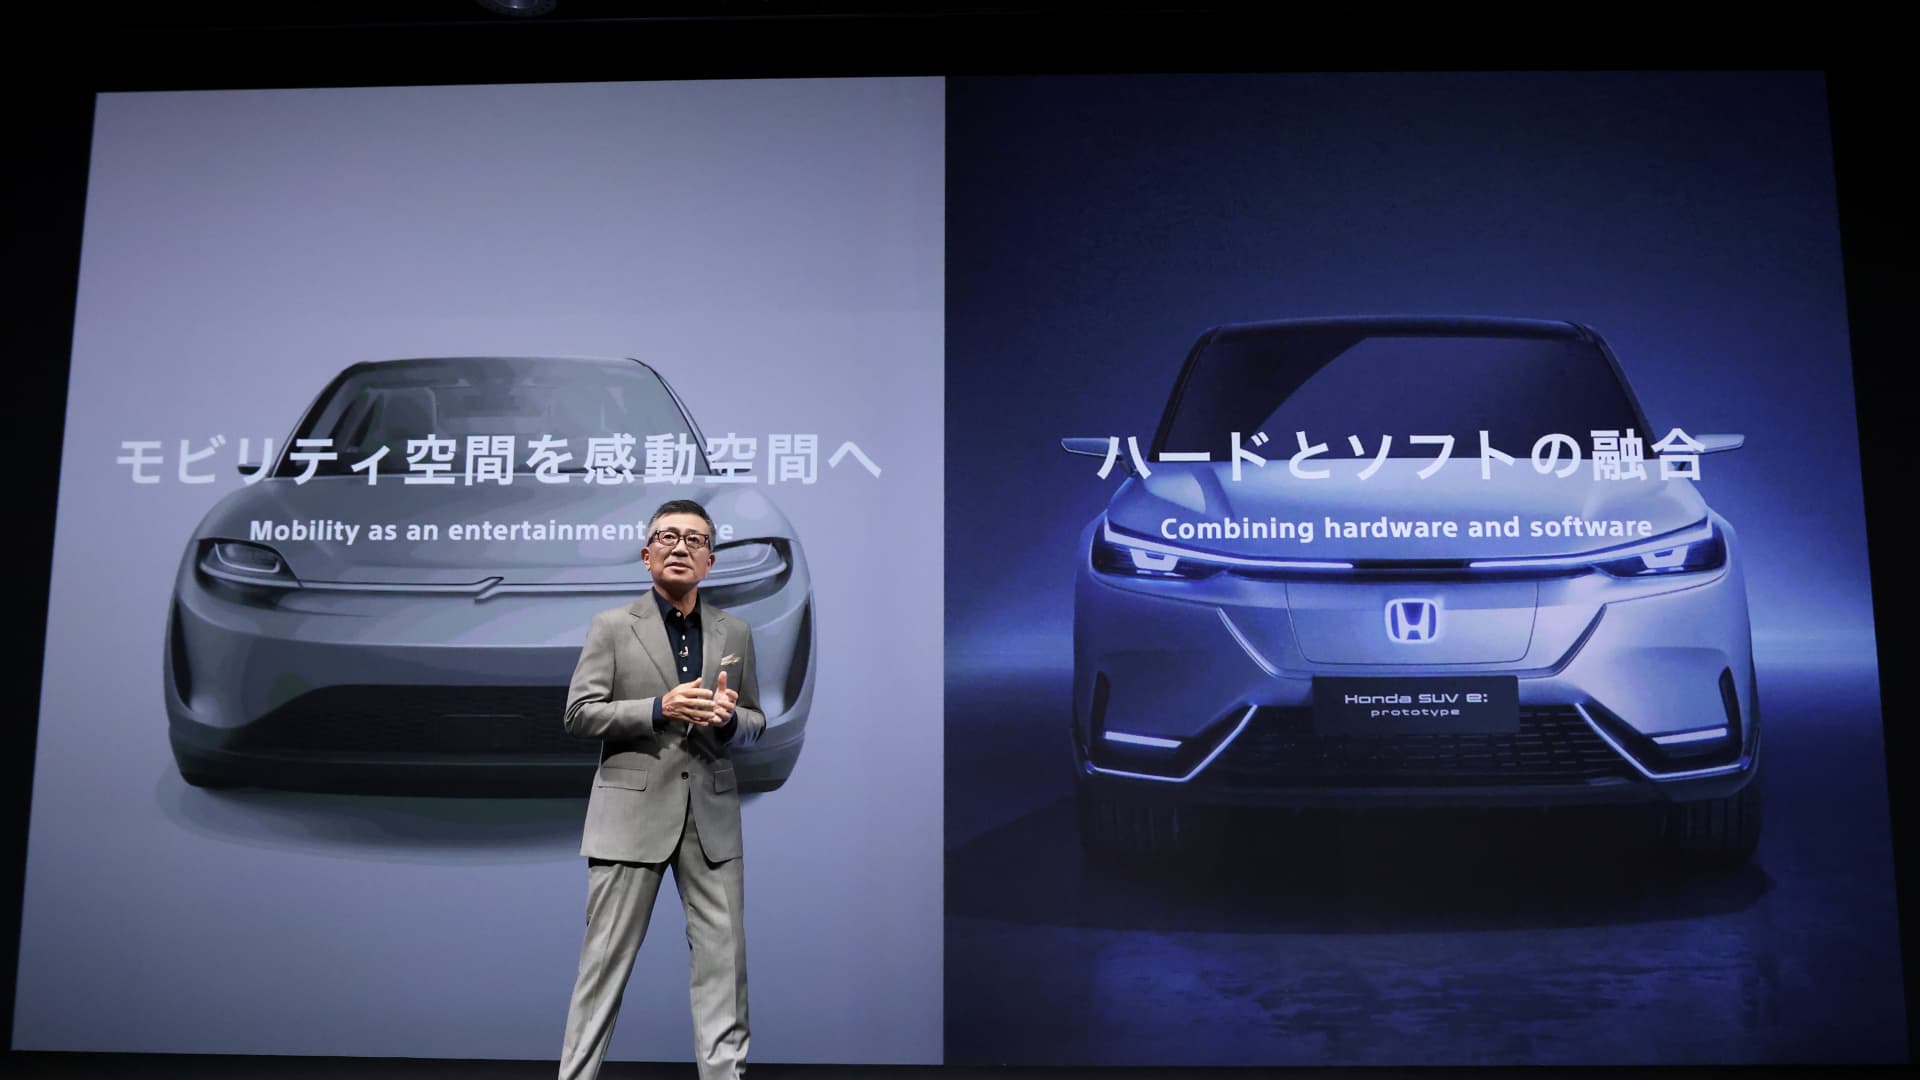 Sony and Honda plan to start U.S. deliveries of their electric vehicle in 2026